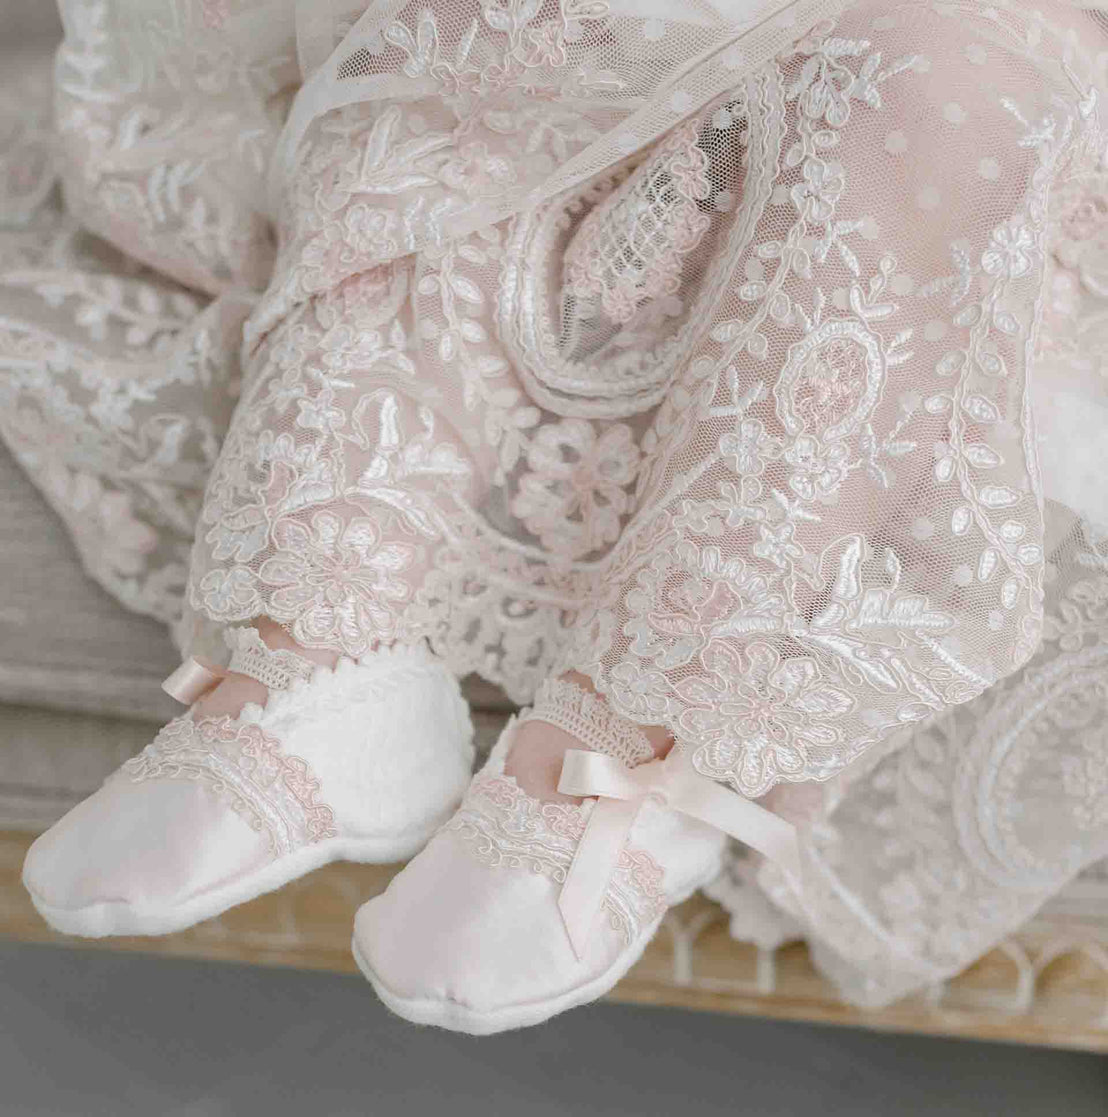 Close up detail of the Elizabeth Christening Gown's skirt, as worn by a baby girl, featuring the intricately detailed pink and ivory dotted mesh embroidered lace with cording. The baby girl is also wearing the Elizabeth Booties made from ivory quilted cotton and detailed with ivory and pink edge lace.